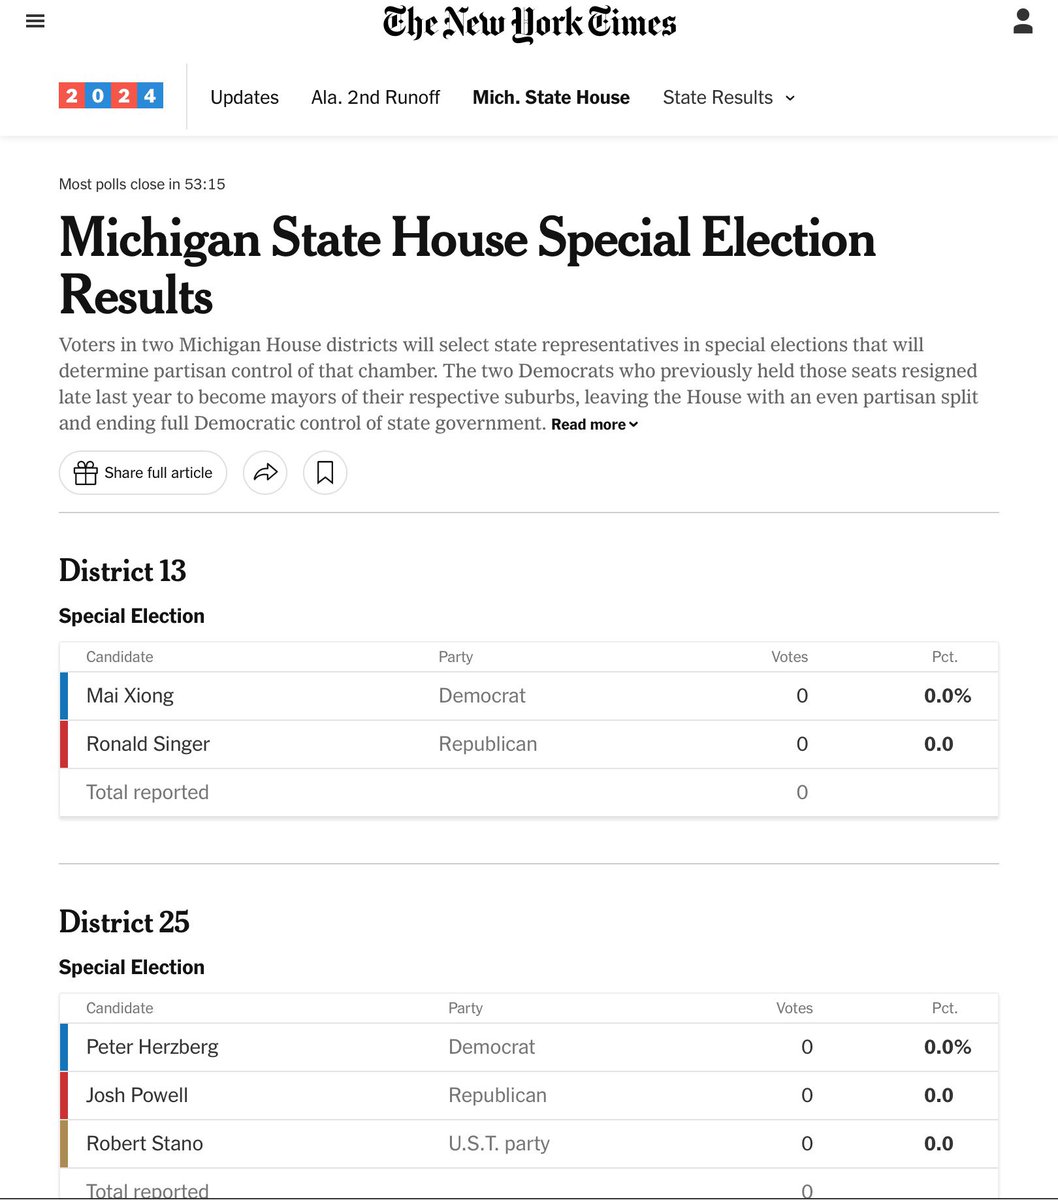 The New York Times @nytimes will soon provide #MiLeg special election results. I wonder if House Democrat majority will be restored or removed +2, continue split +1 and +1, or what if Robert Stano becomes the very first U.S. Taxpayers Party legislator?🤔🗳️
nytimes.com/interactive/20…